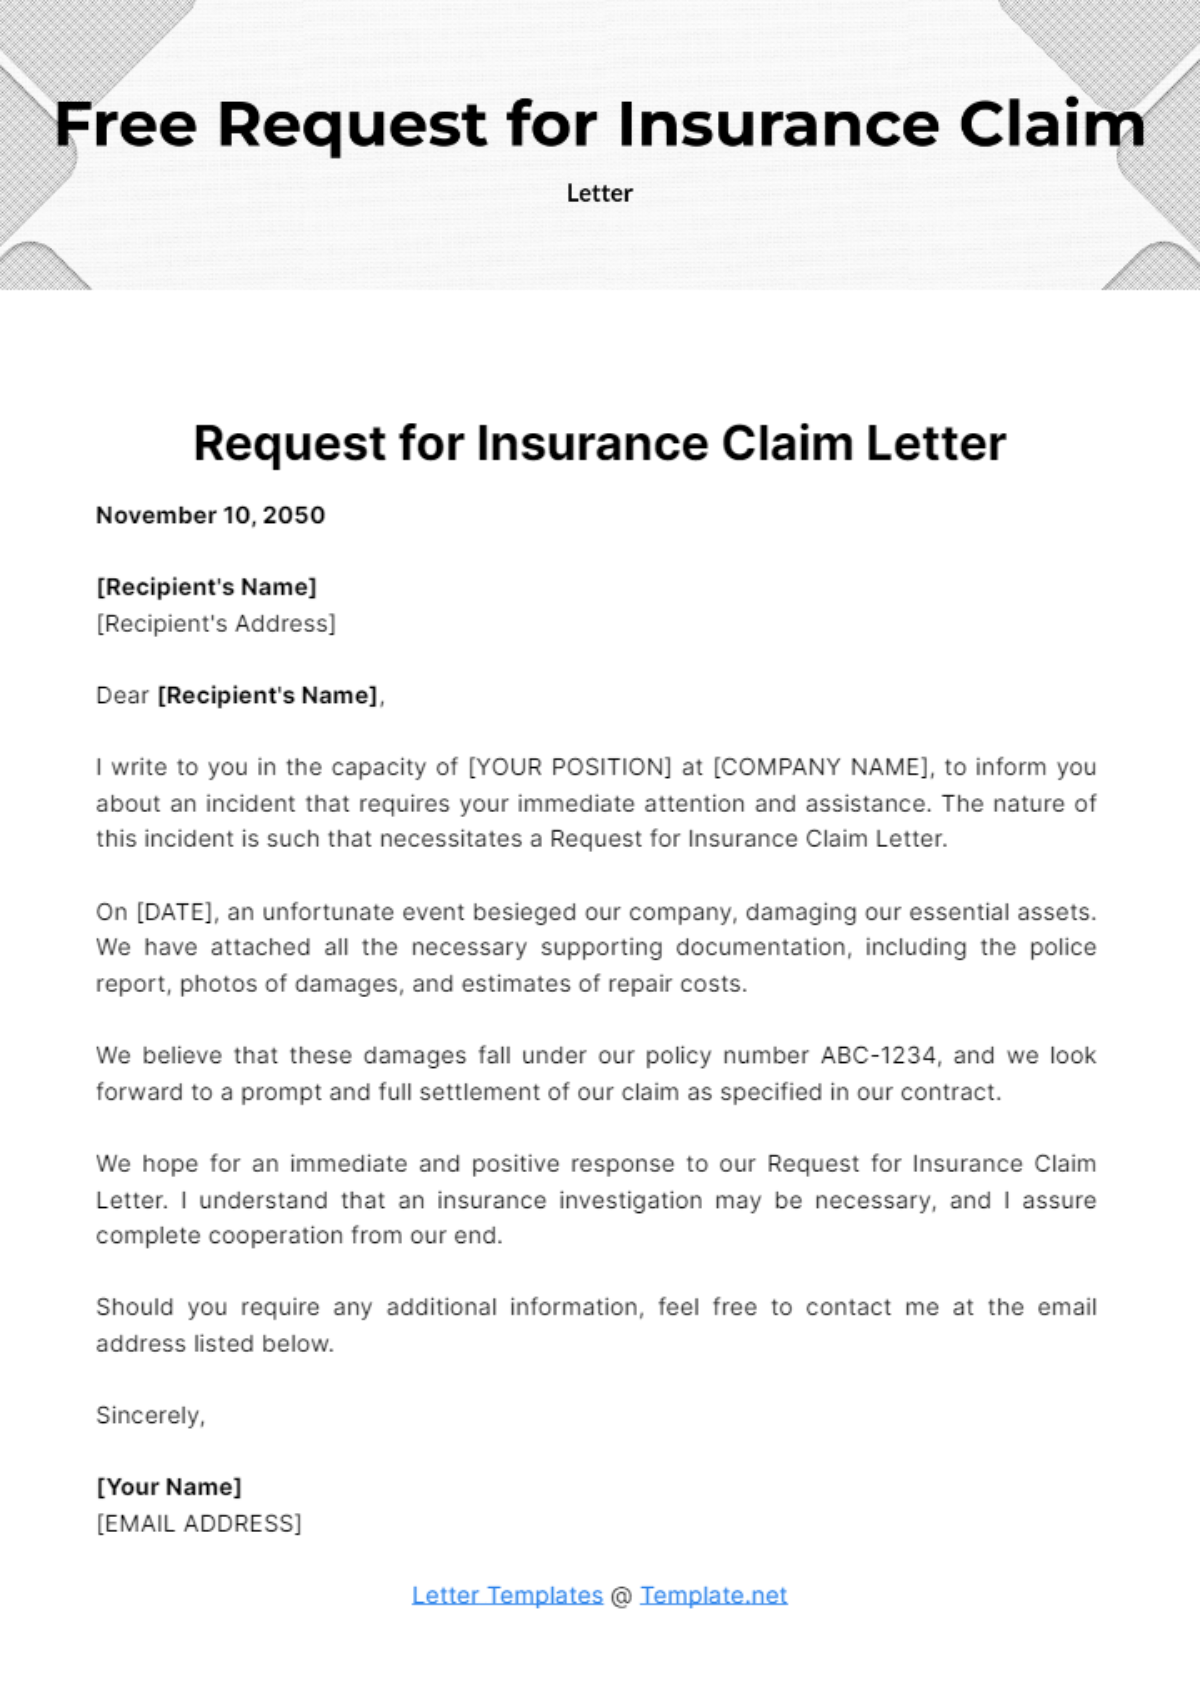 Free Request for Insurance Claim Letter Template